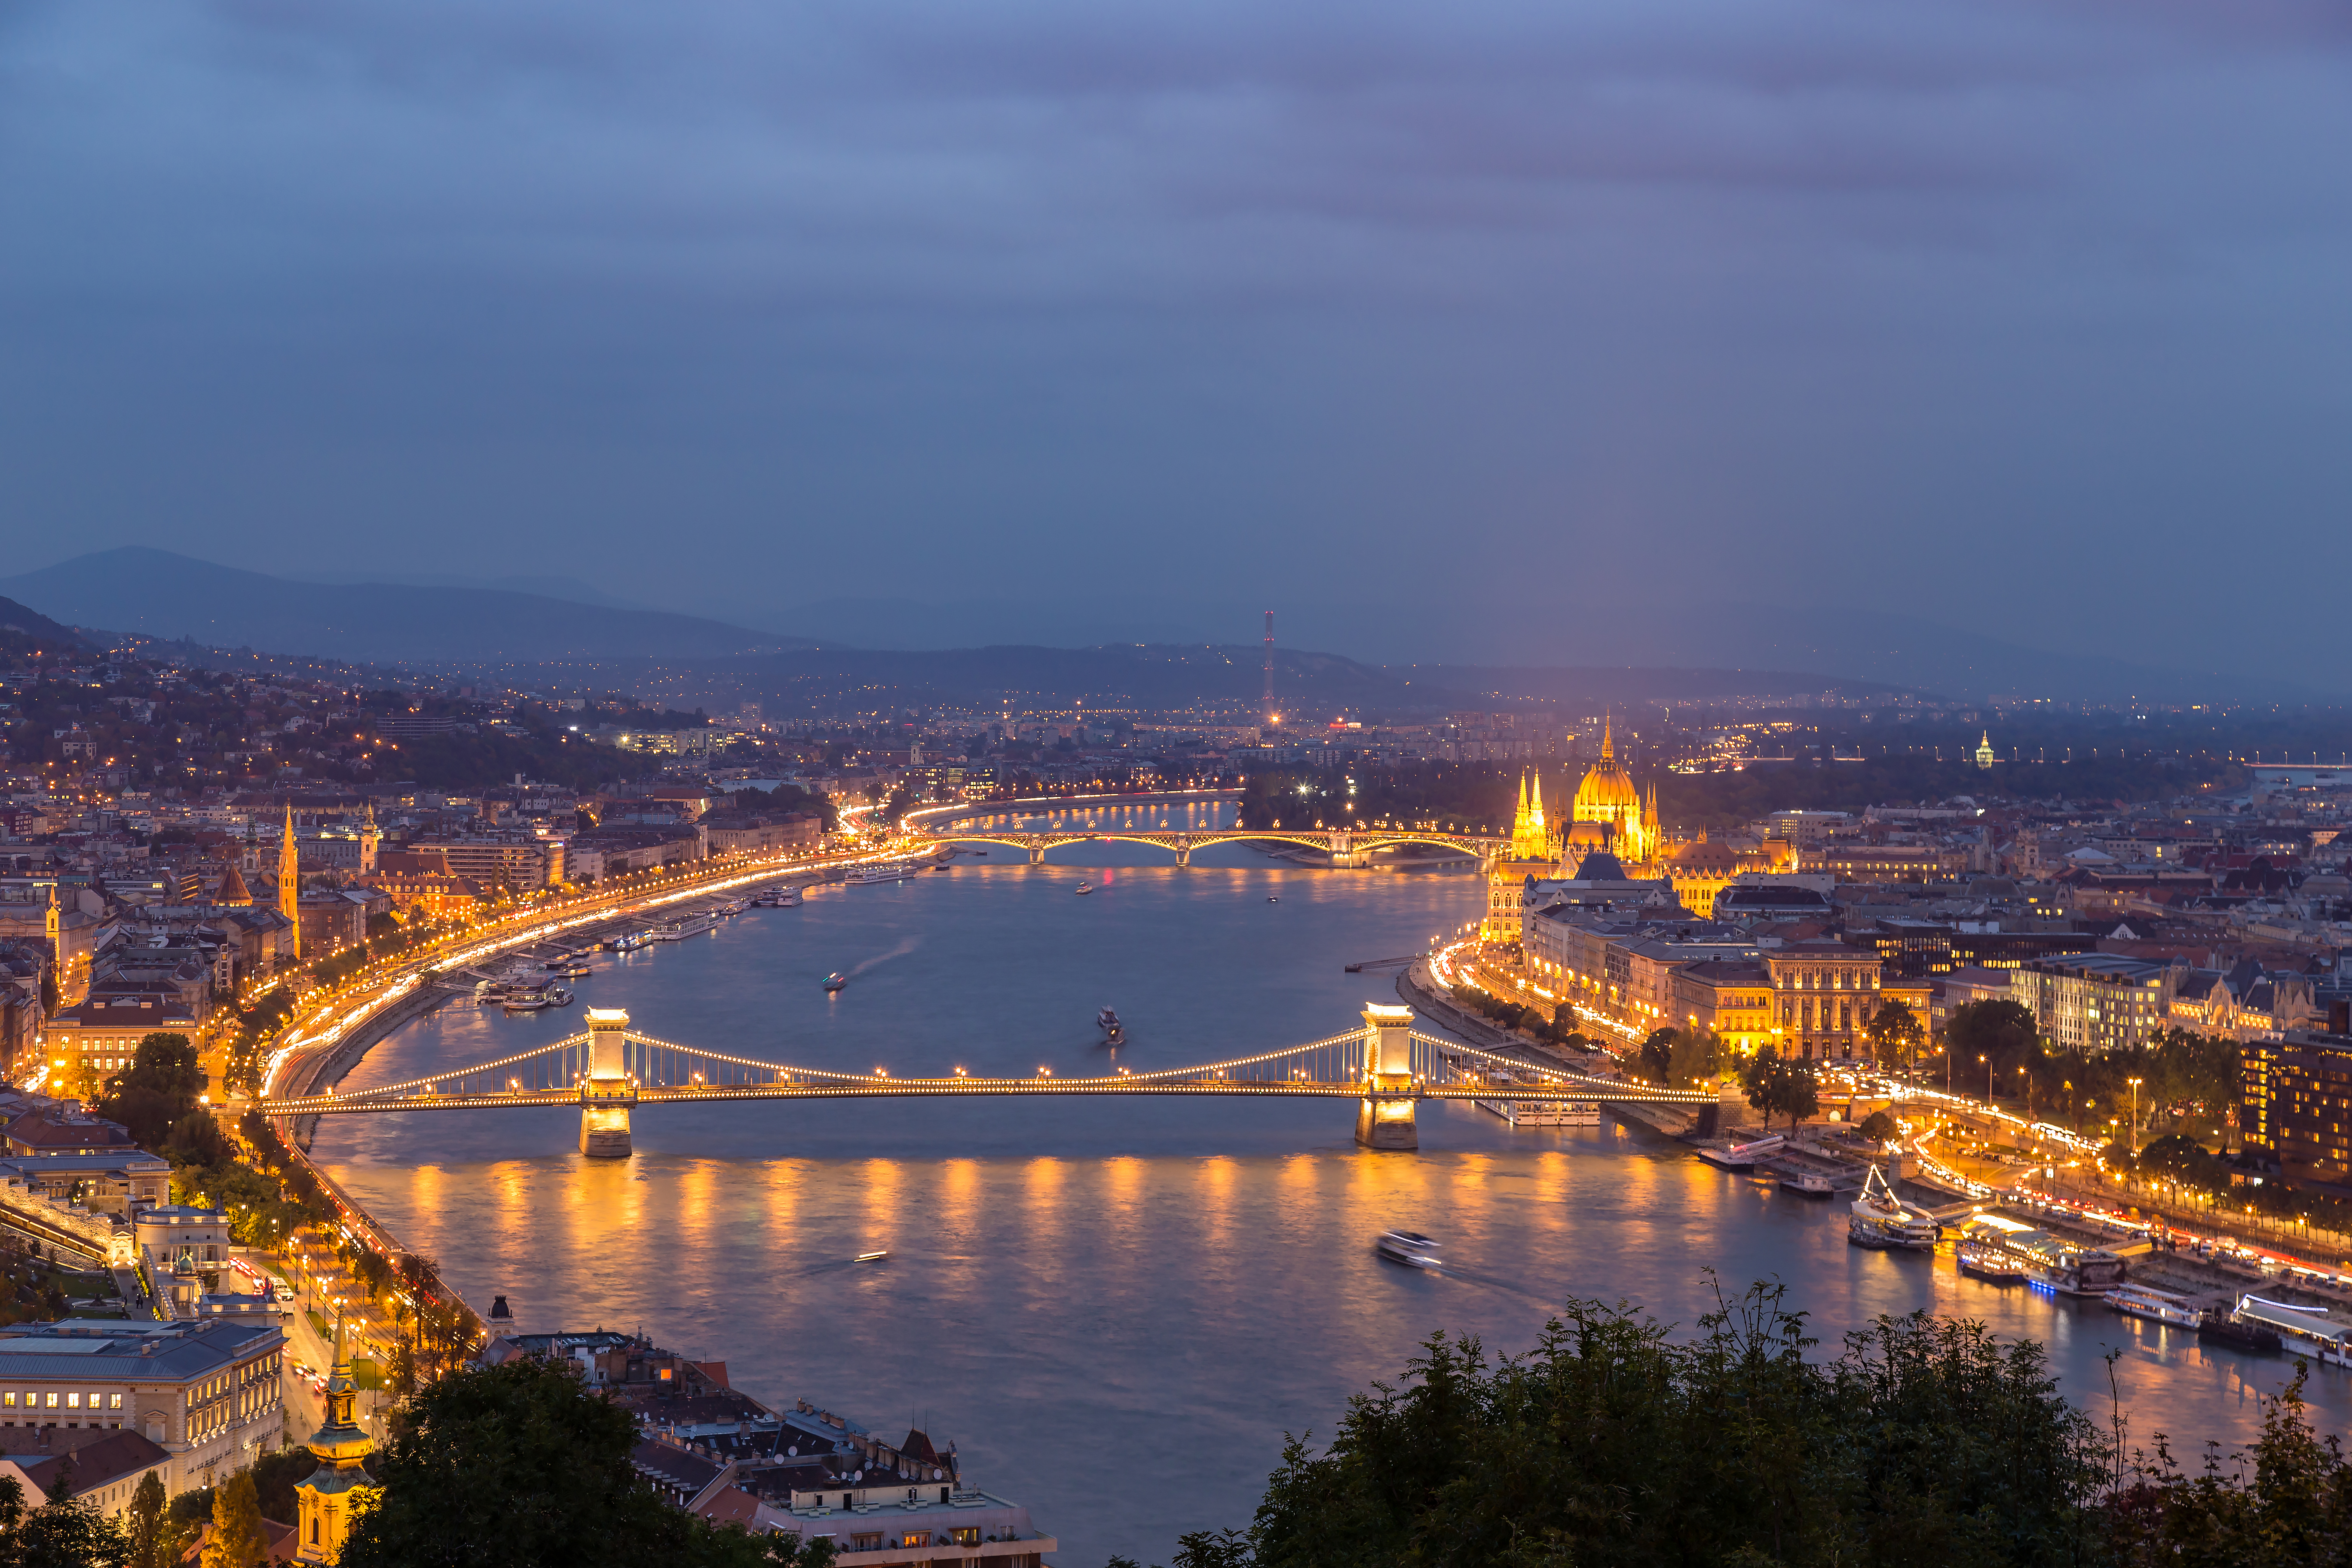 Night view of danube river and budapest.